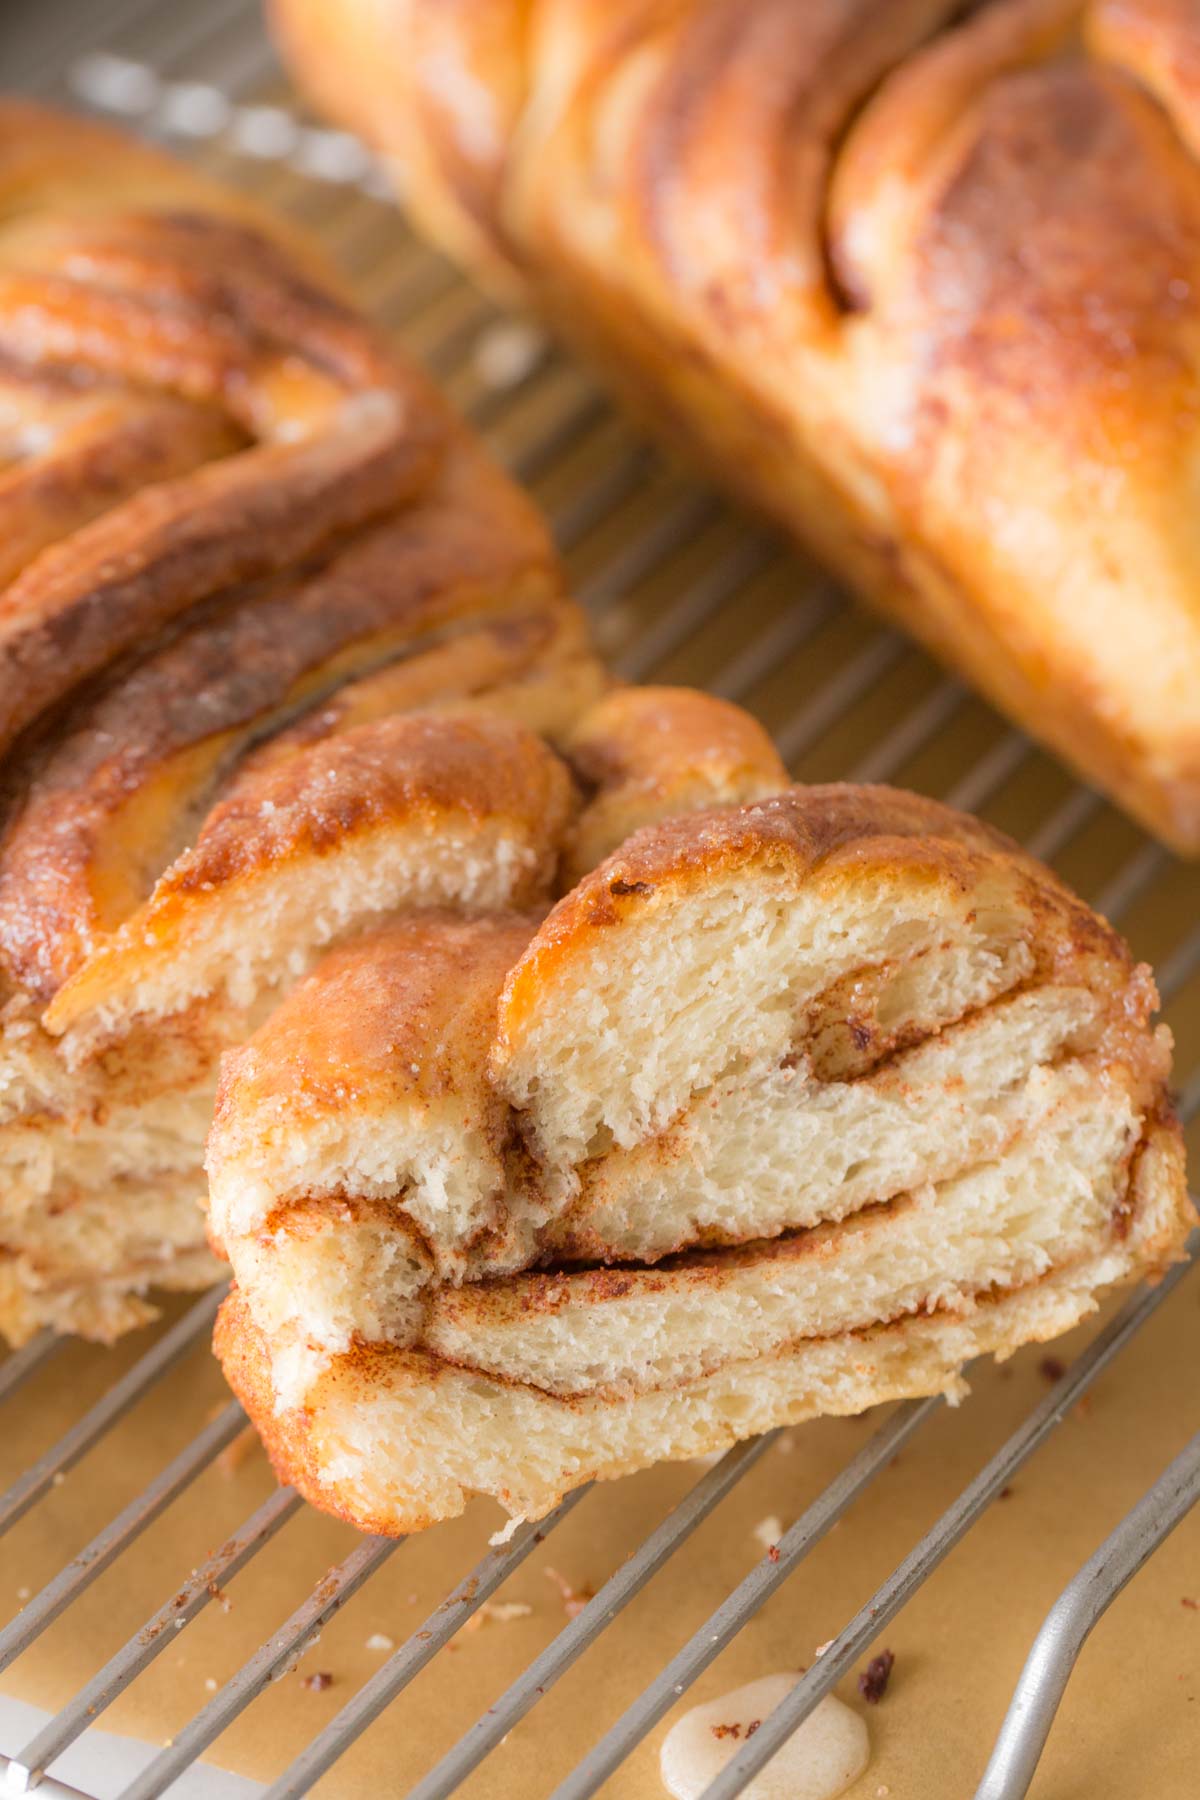 Close up shot of a slice of Cinnamon Twist Bread, showing the ribbons of cinnamon and sugar.  